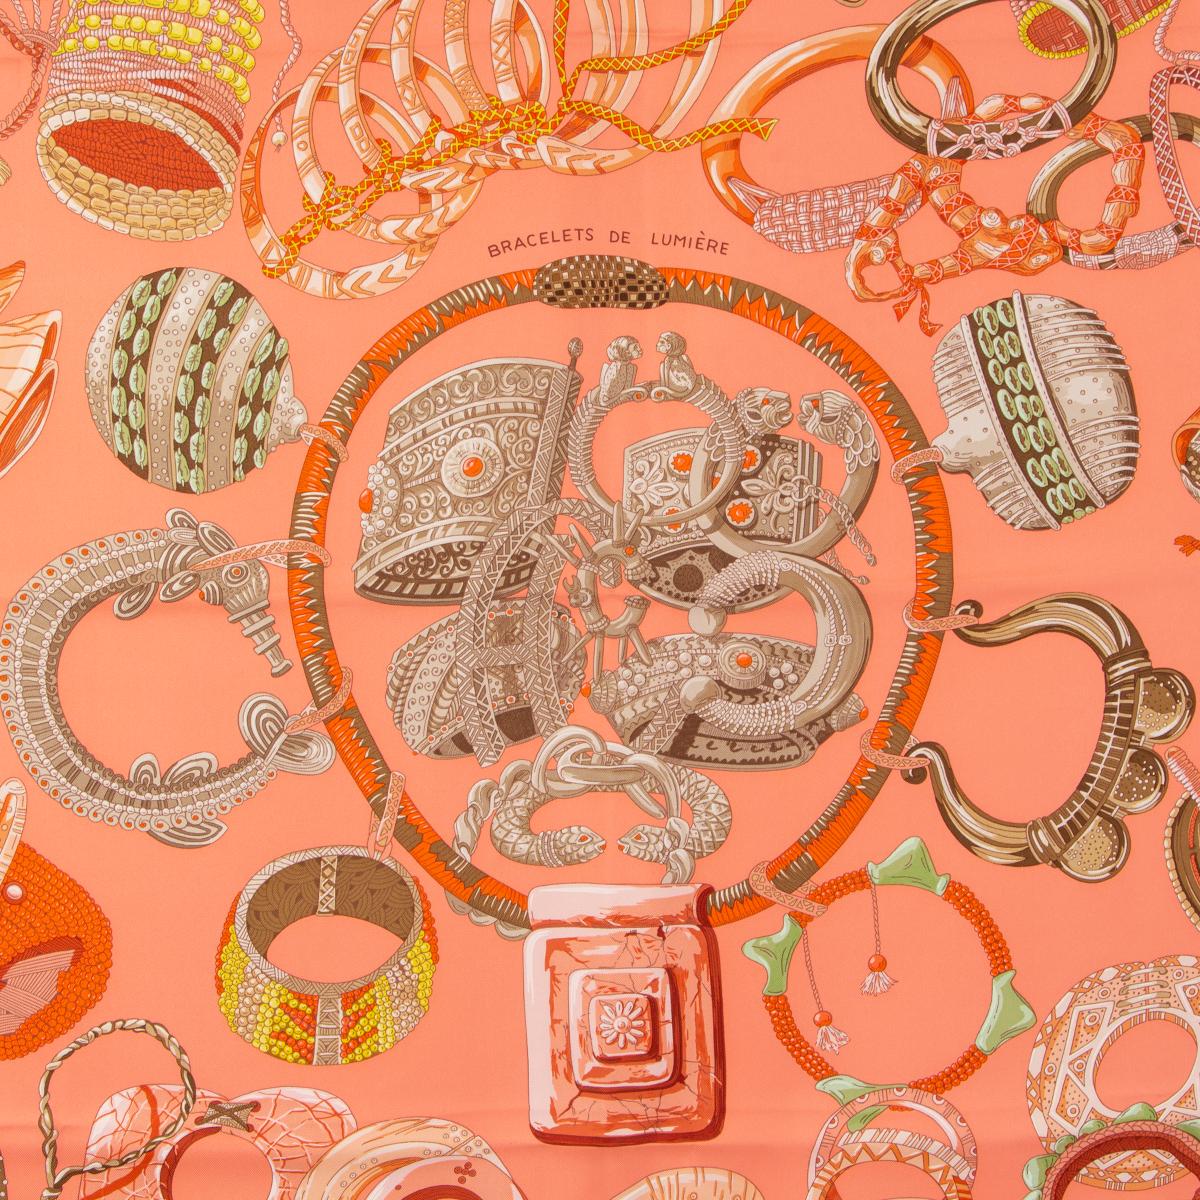 Hermes 'Bracelets de Lumiere 90' scarf by Annie Faivre in salmon pink silk twill (100%) with yellow hem and details in green and various shades of coral. Has been worn and is in excellent condition.

Width 90cm (35.1in)
Height 90cm (35.1in)
